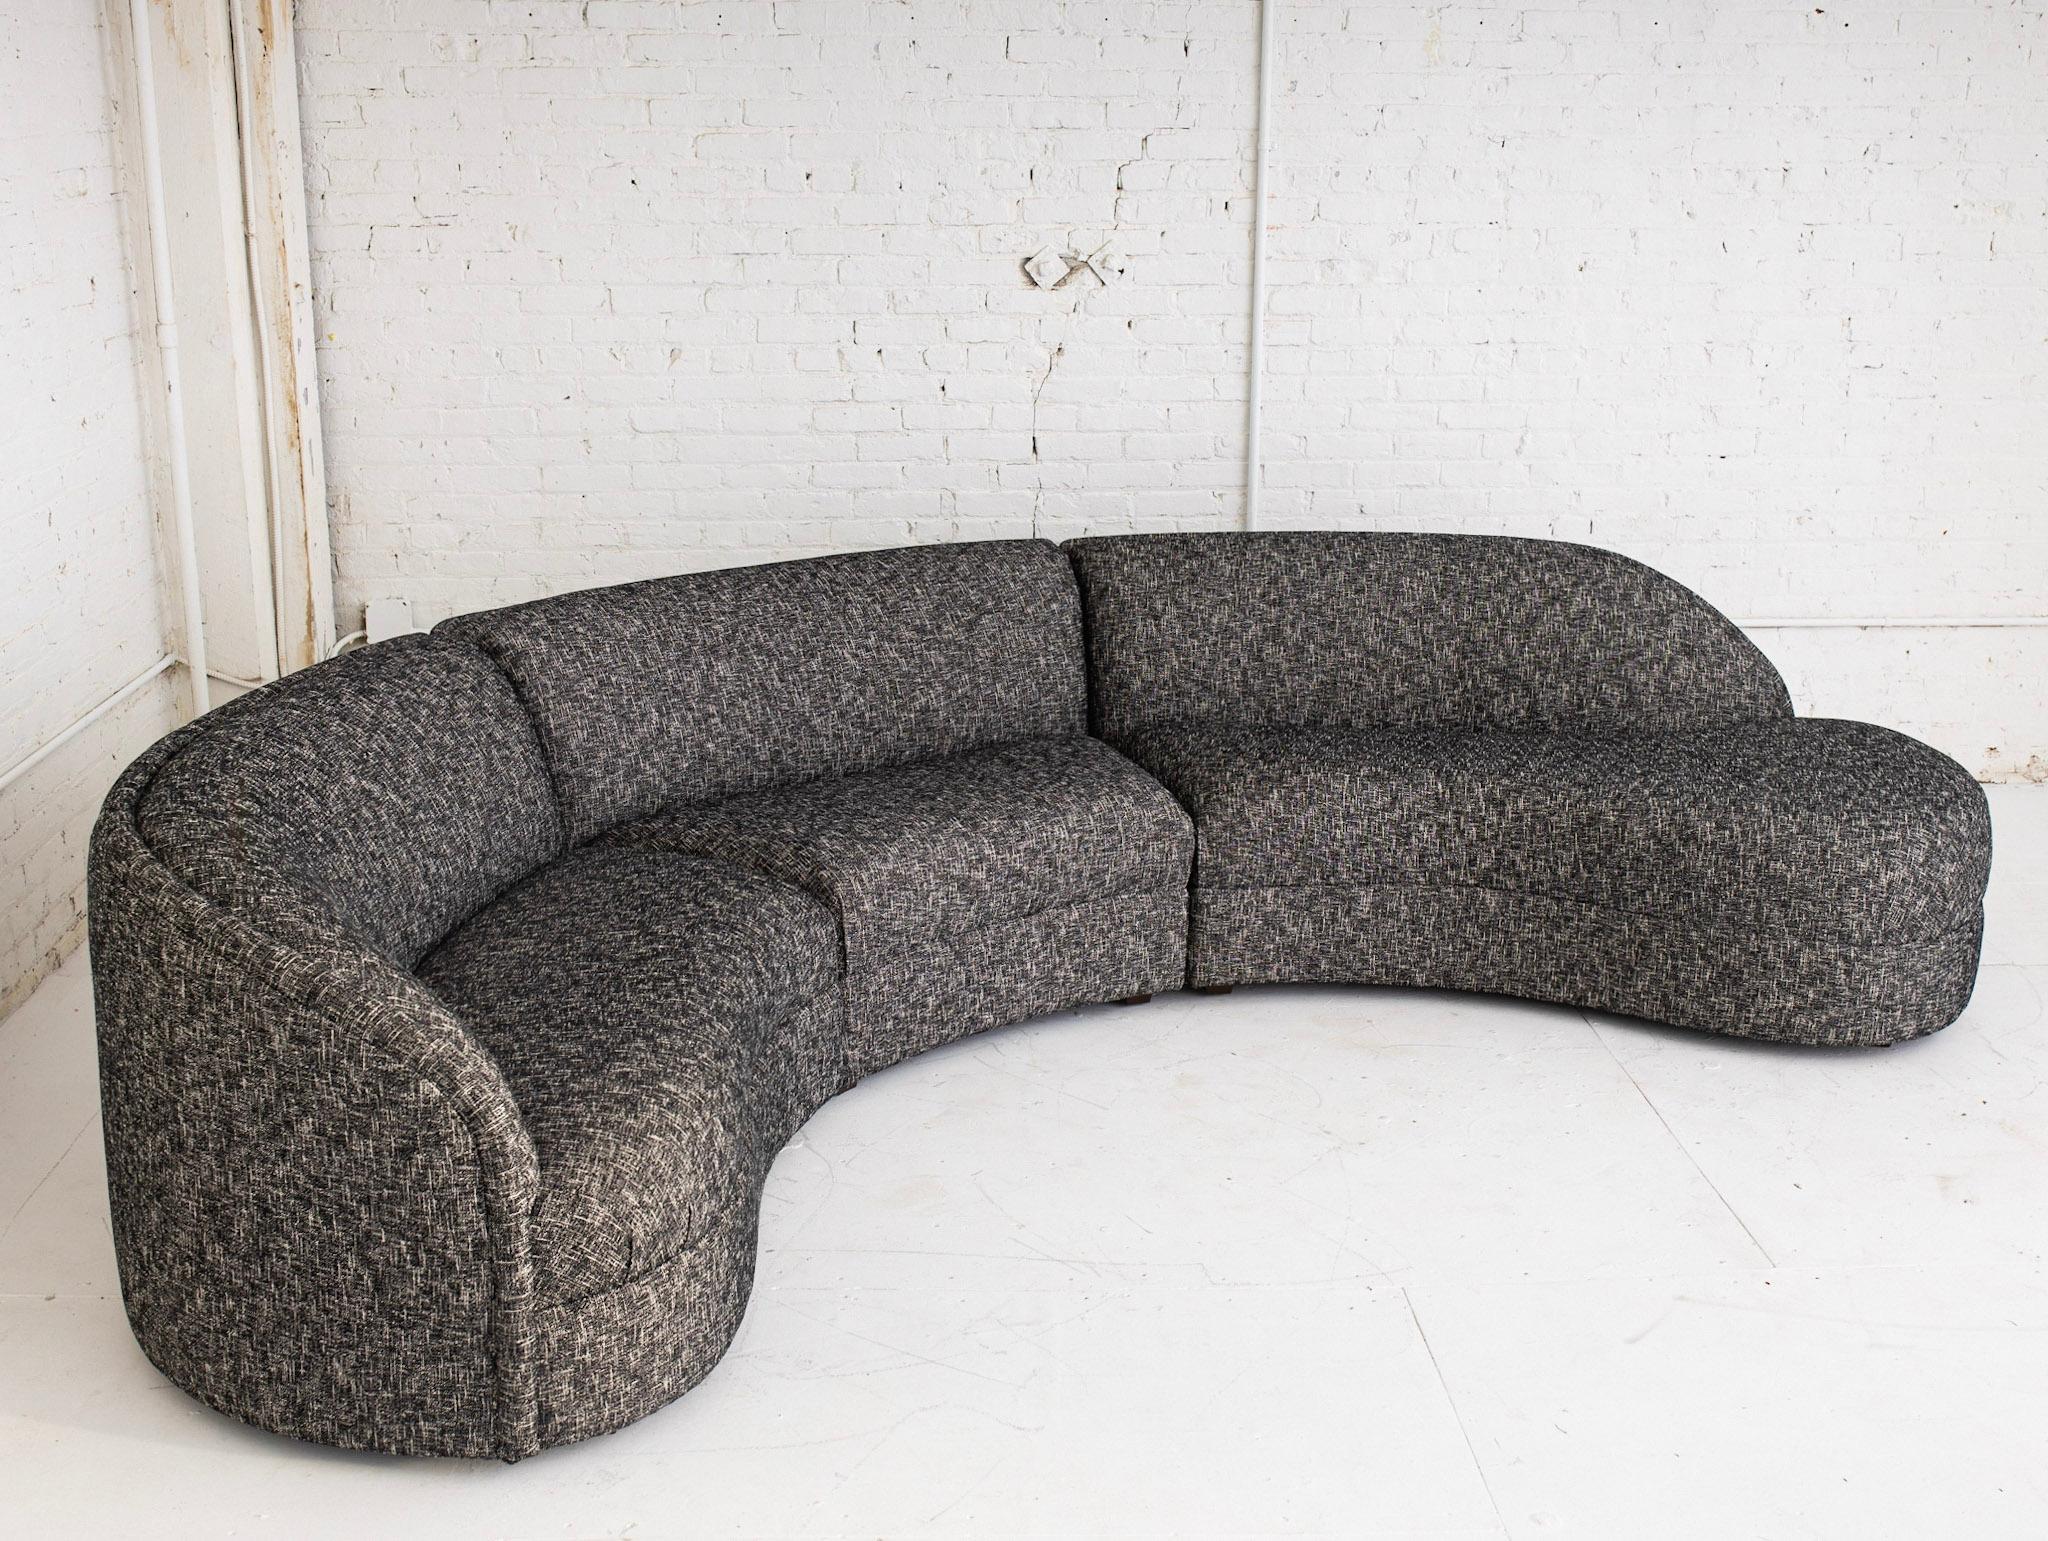 3 piece kidney shaped sectional attributed to Maurice Villency(1901 - 1987). Black and white textured tweed fabric. Depth of sofa measures 30.”
Villency was born in Glasgow, Scotland and immigrated to New York in his late teens, where he brought